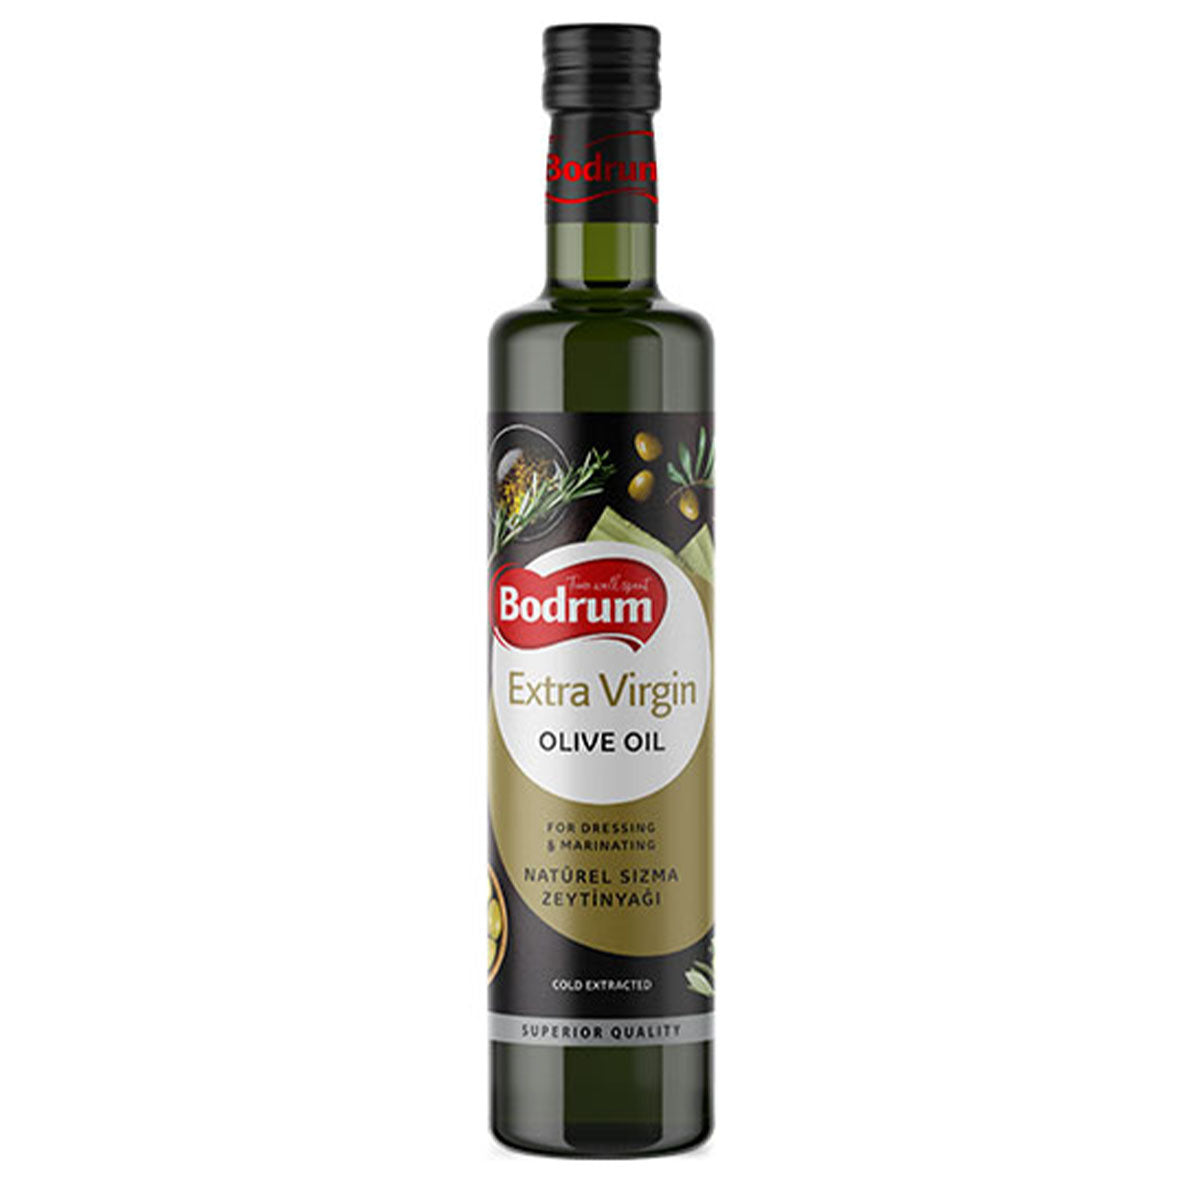 Bodrum - Extra Virgin Olive Oil - 250ml - Continental Food Store